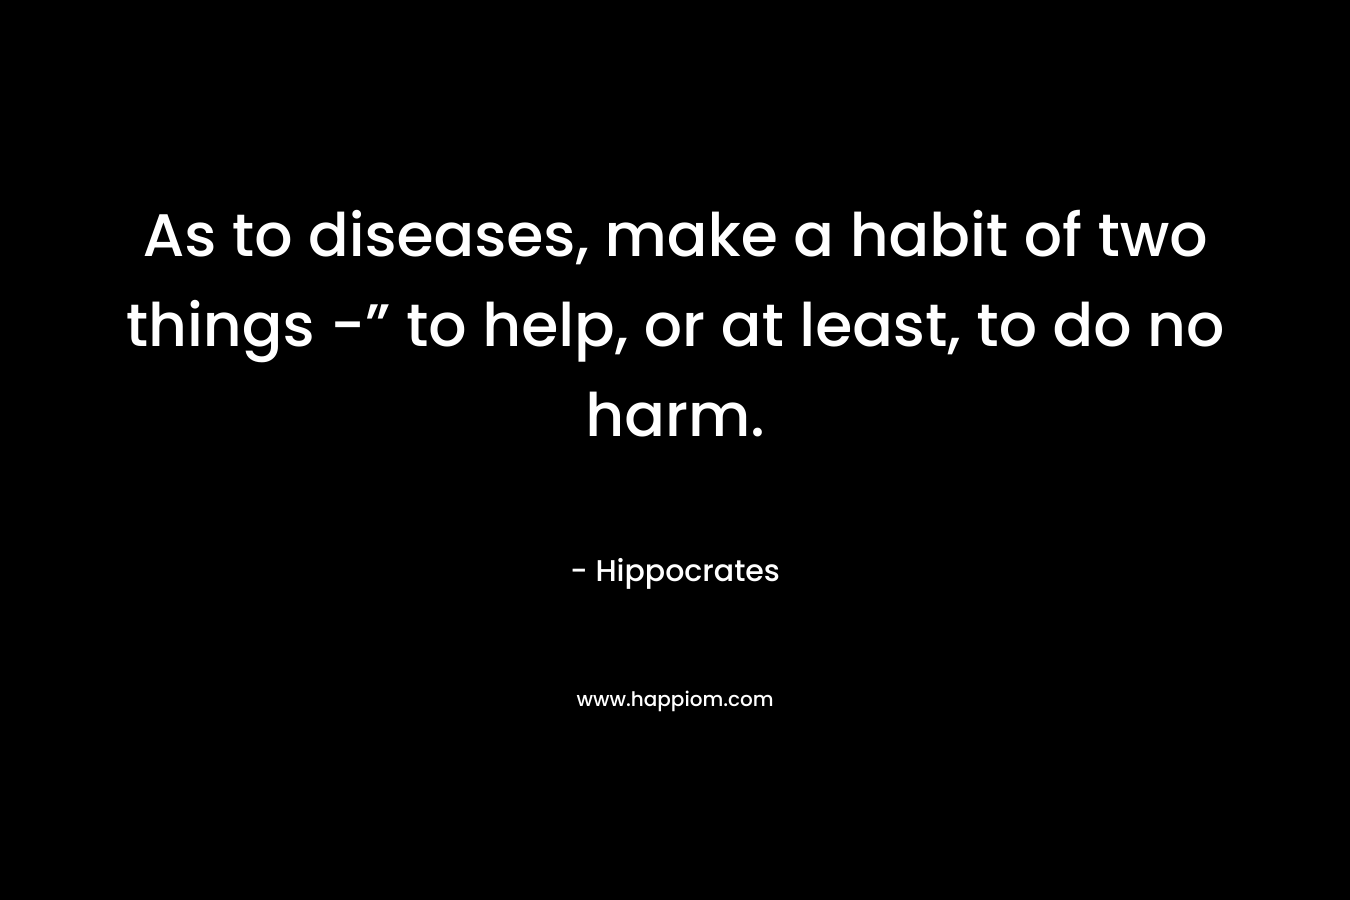 As to diseases, make a habit of two things -” to help, or at least, to do no harm. – Hippocrates